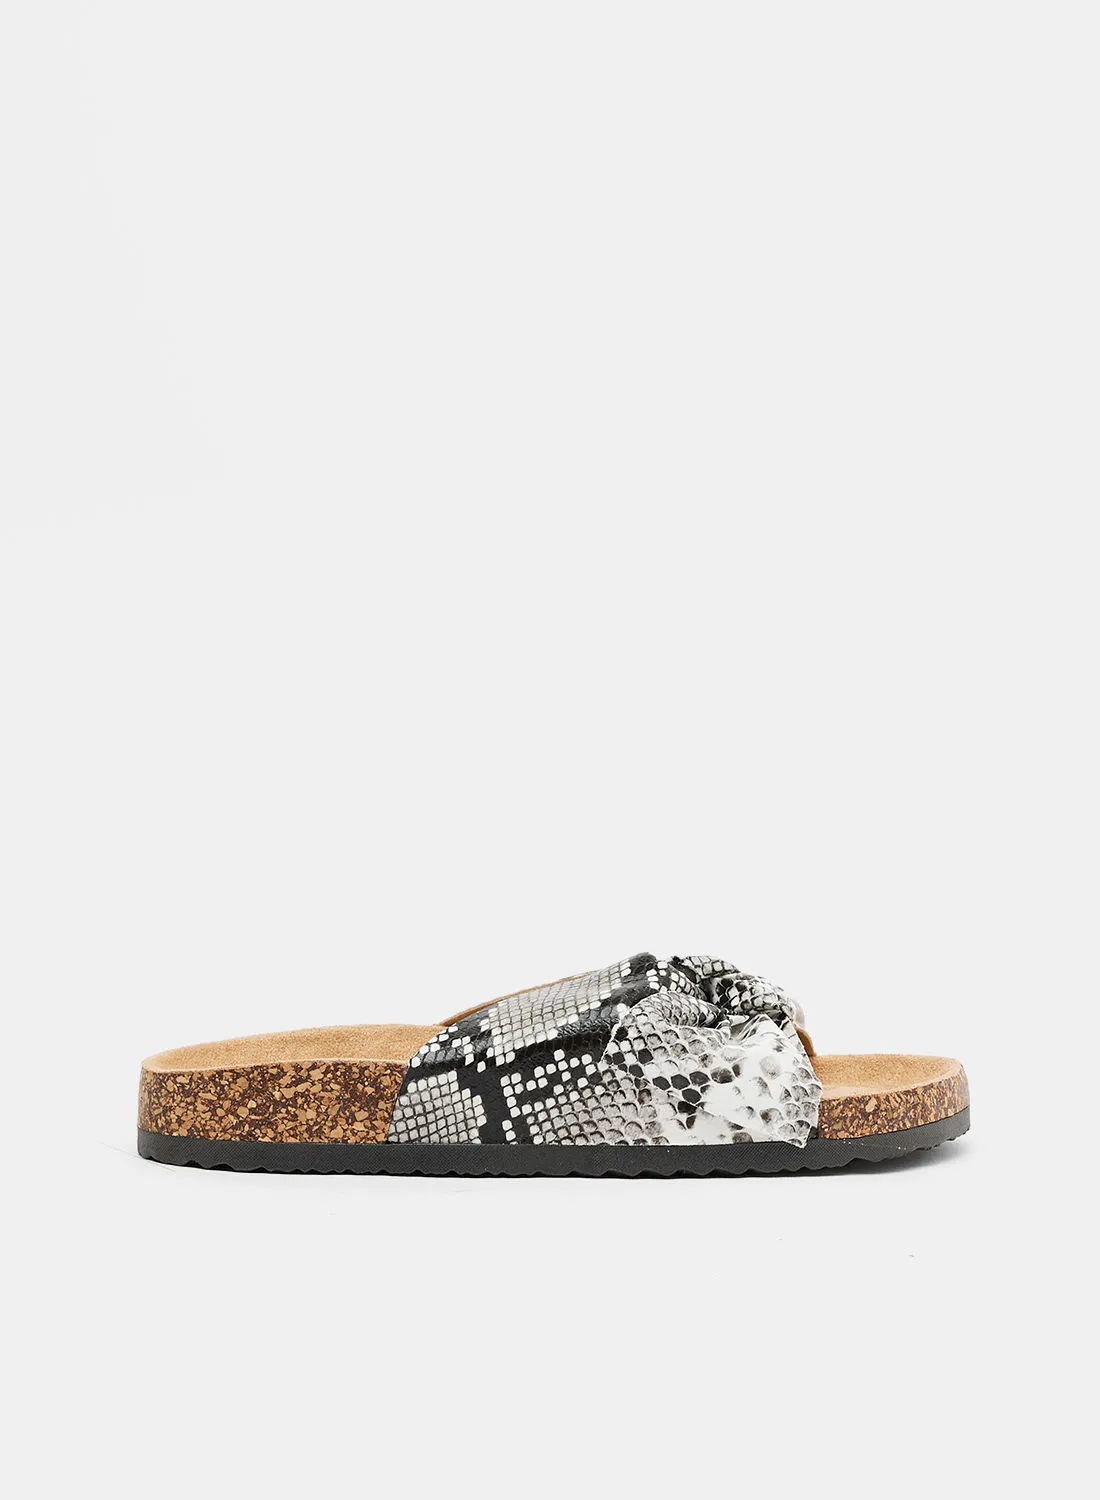 DOWN TO EARTH Snakeskin Print Flat Sandals